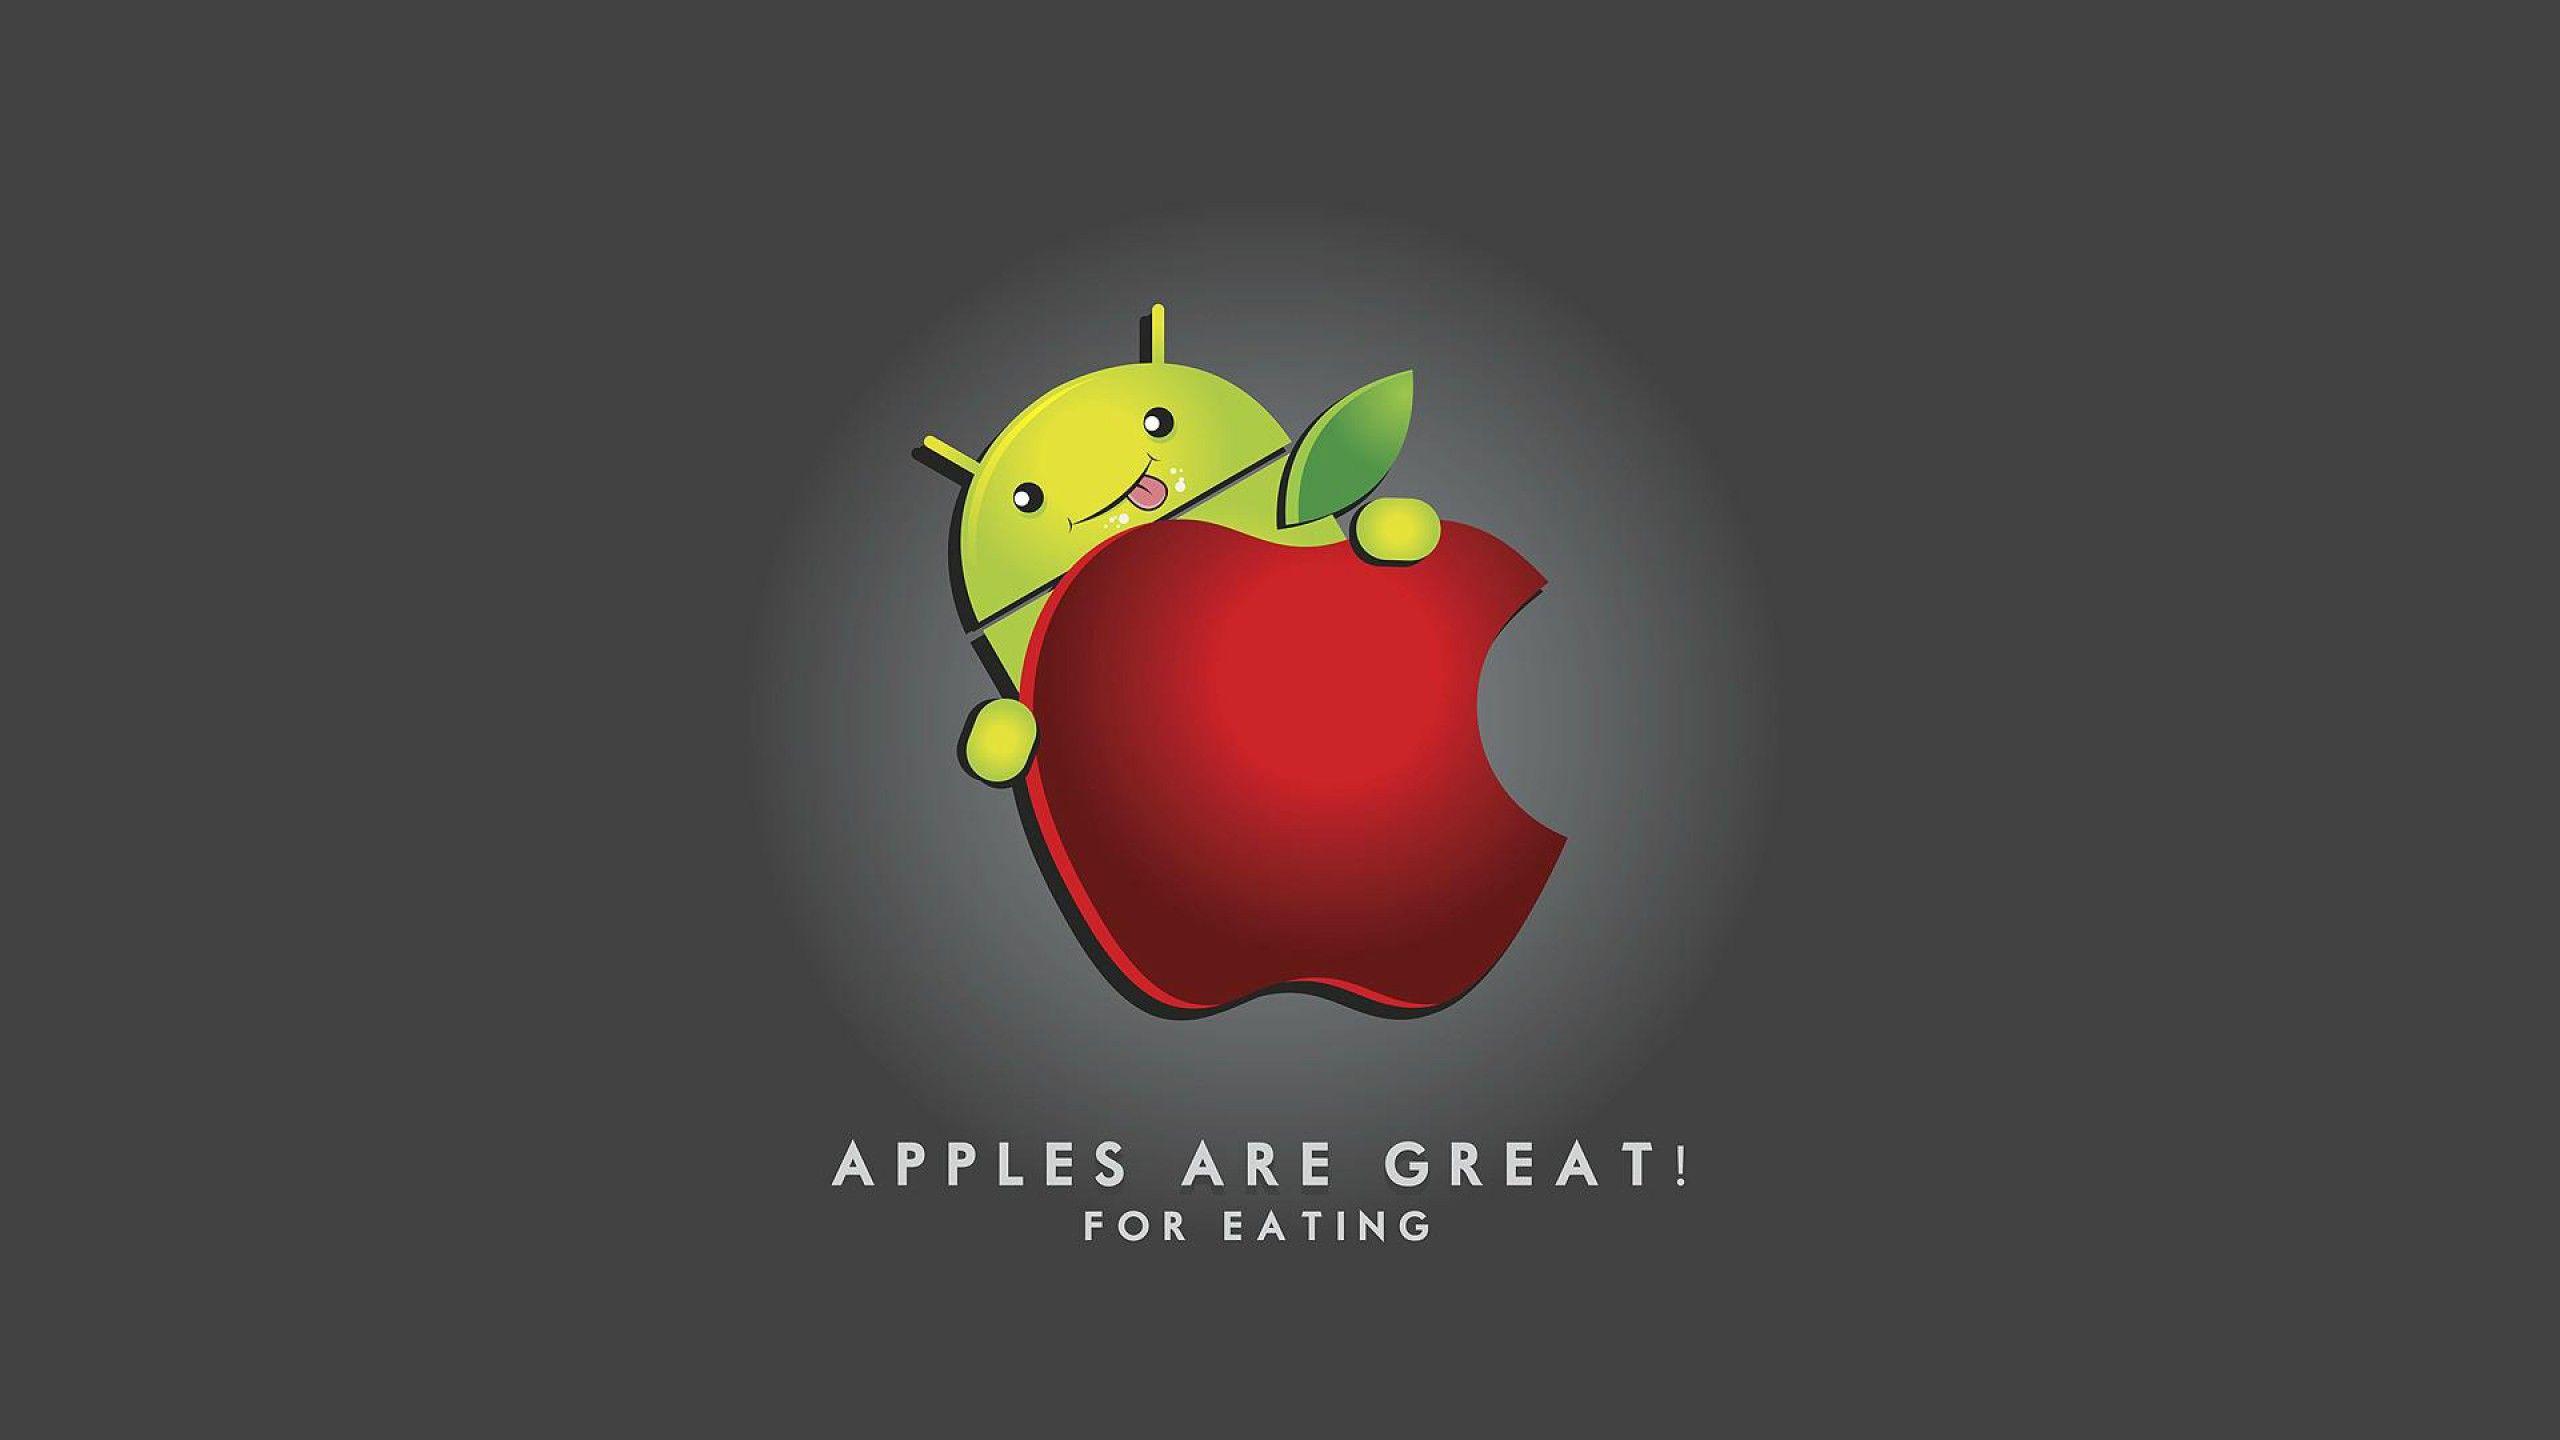 Apples Are Great For Eating Apple vs Android